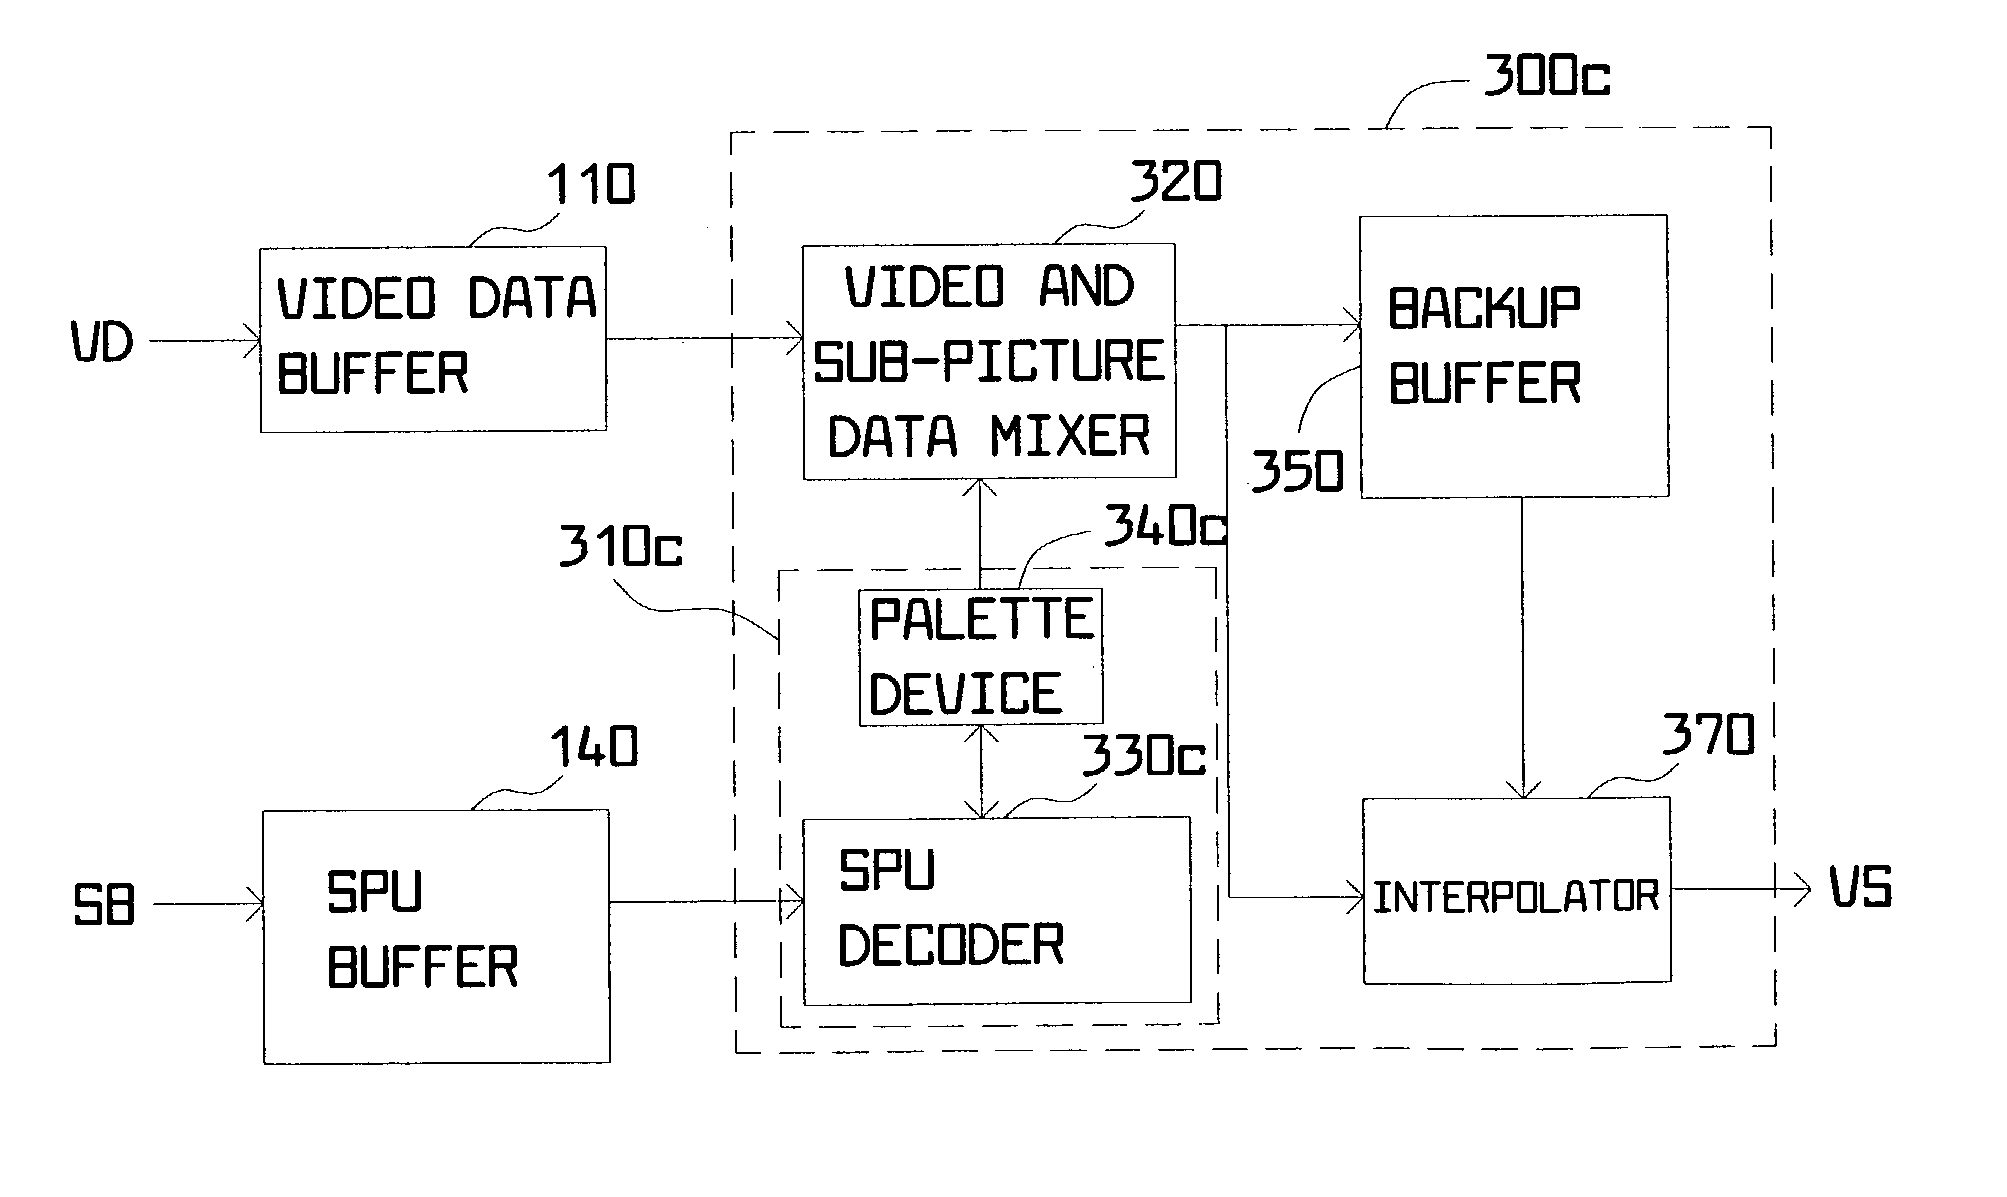 Apparatus and method for video data processing in digital video decoding